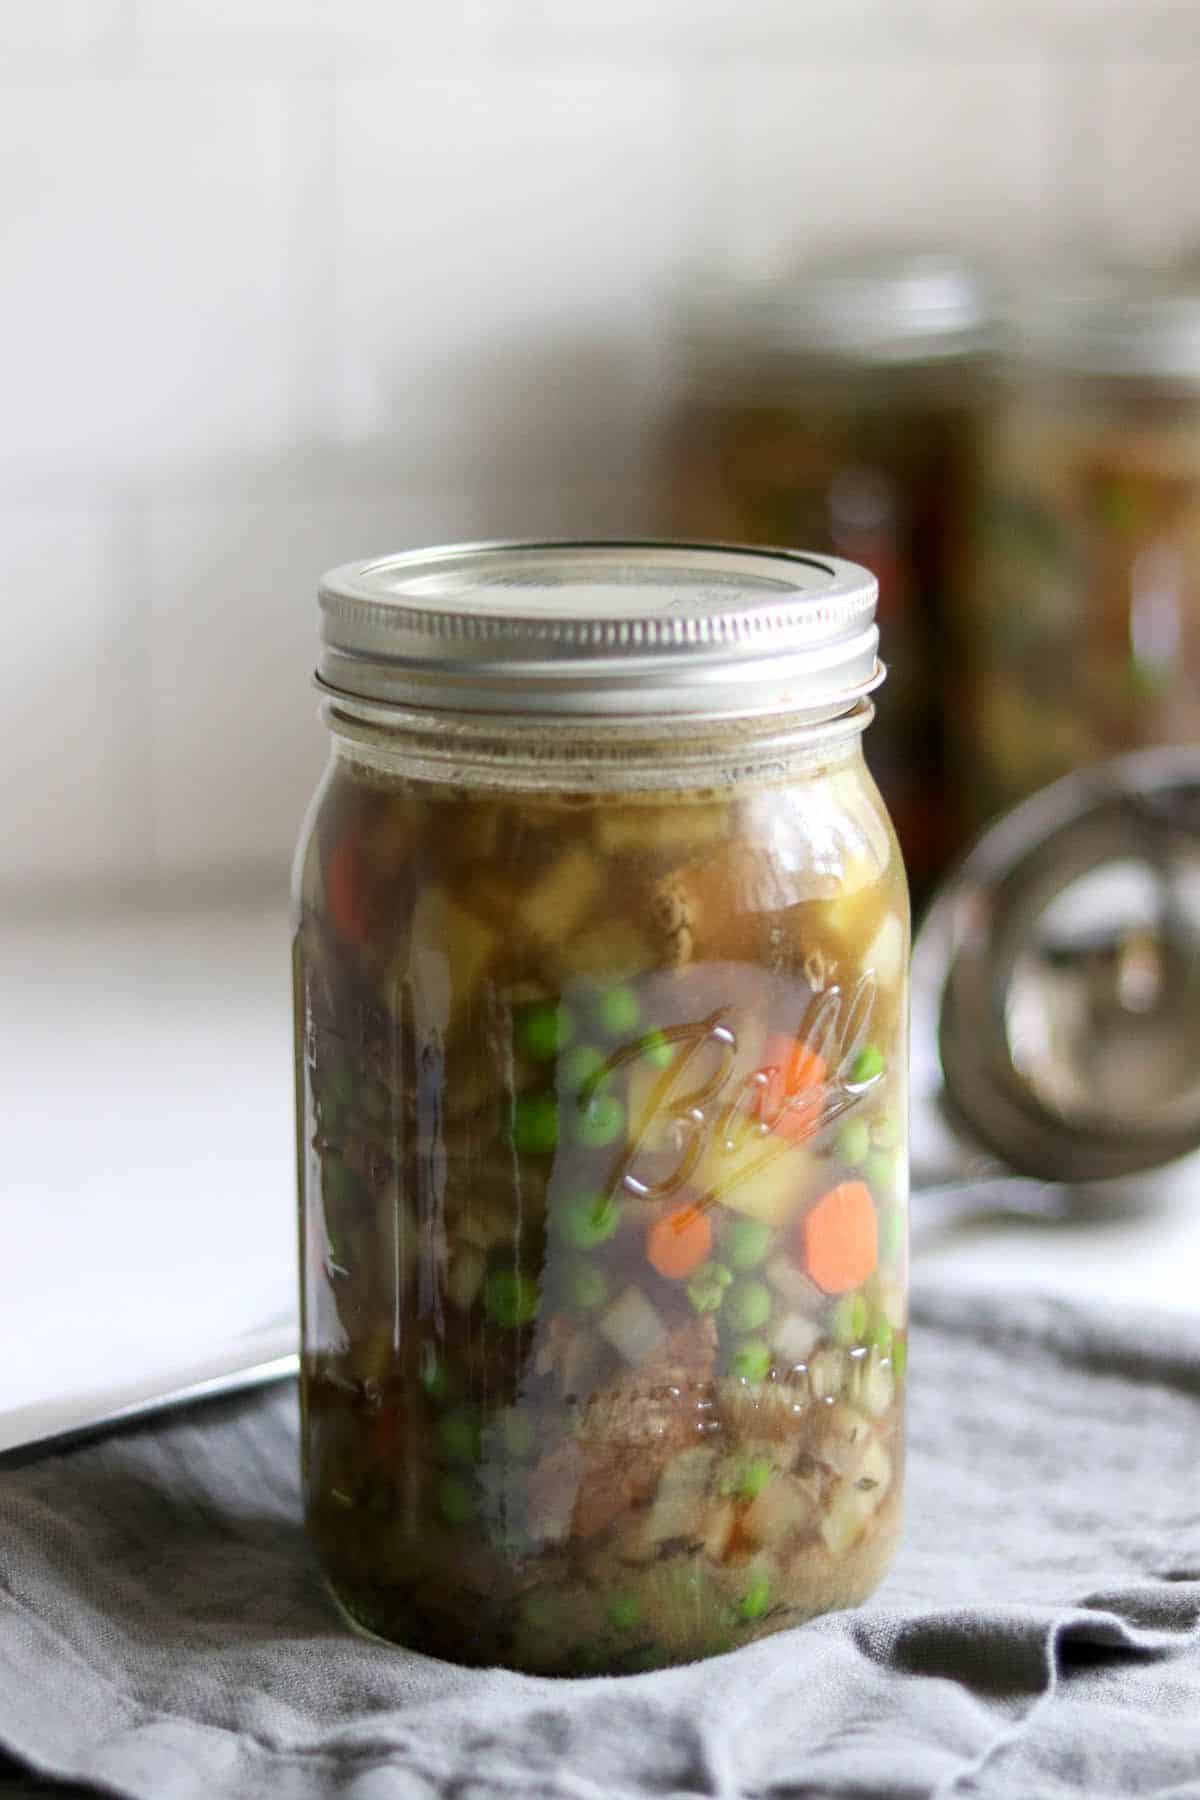 Beef pot pie filling canned in a glass jar.